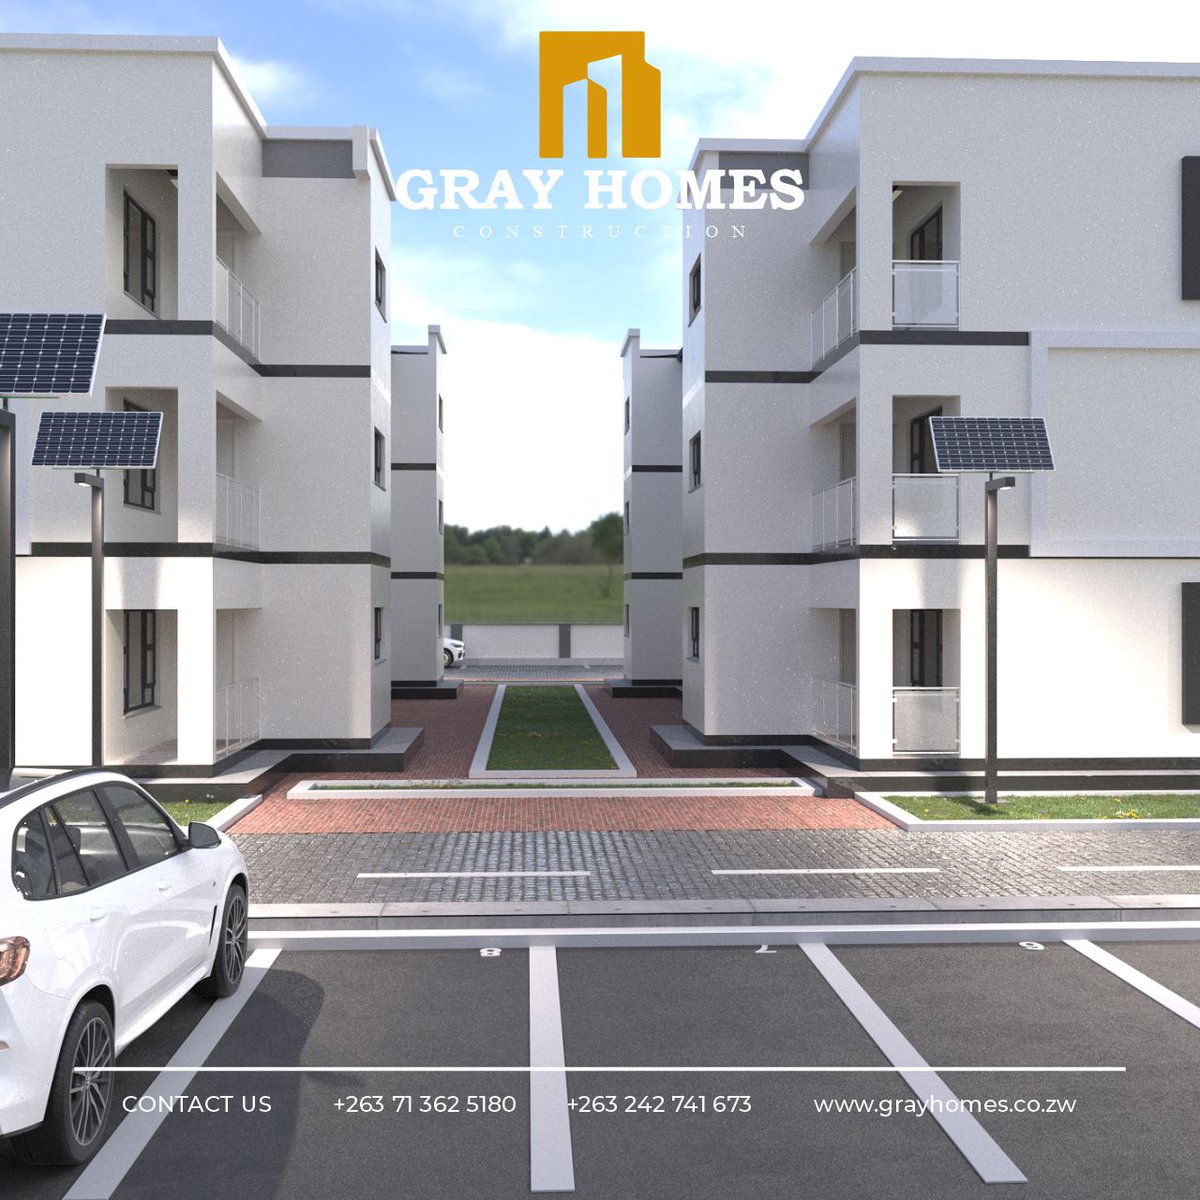 GRAY HOMES BULAWAYO FLATS || 3 BEDS
Own a Modern Flat in Bulawayo the City of Kings and Queens.
#buildingdreams #modernflats #grayhomes